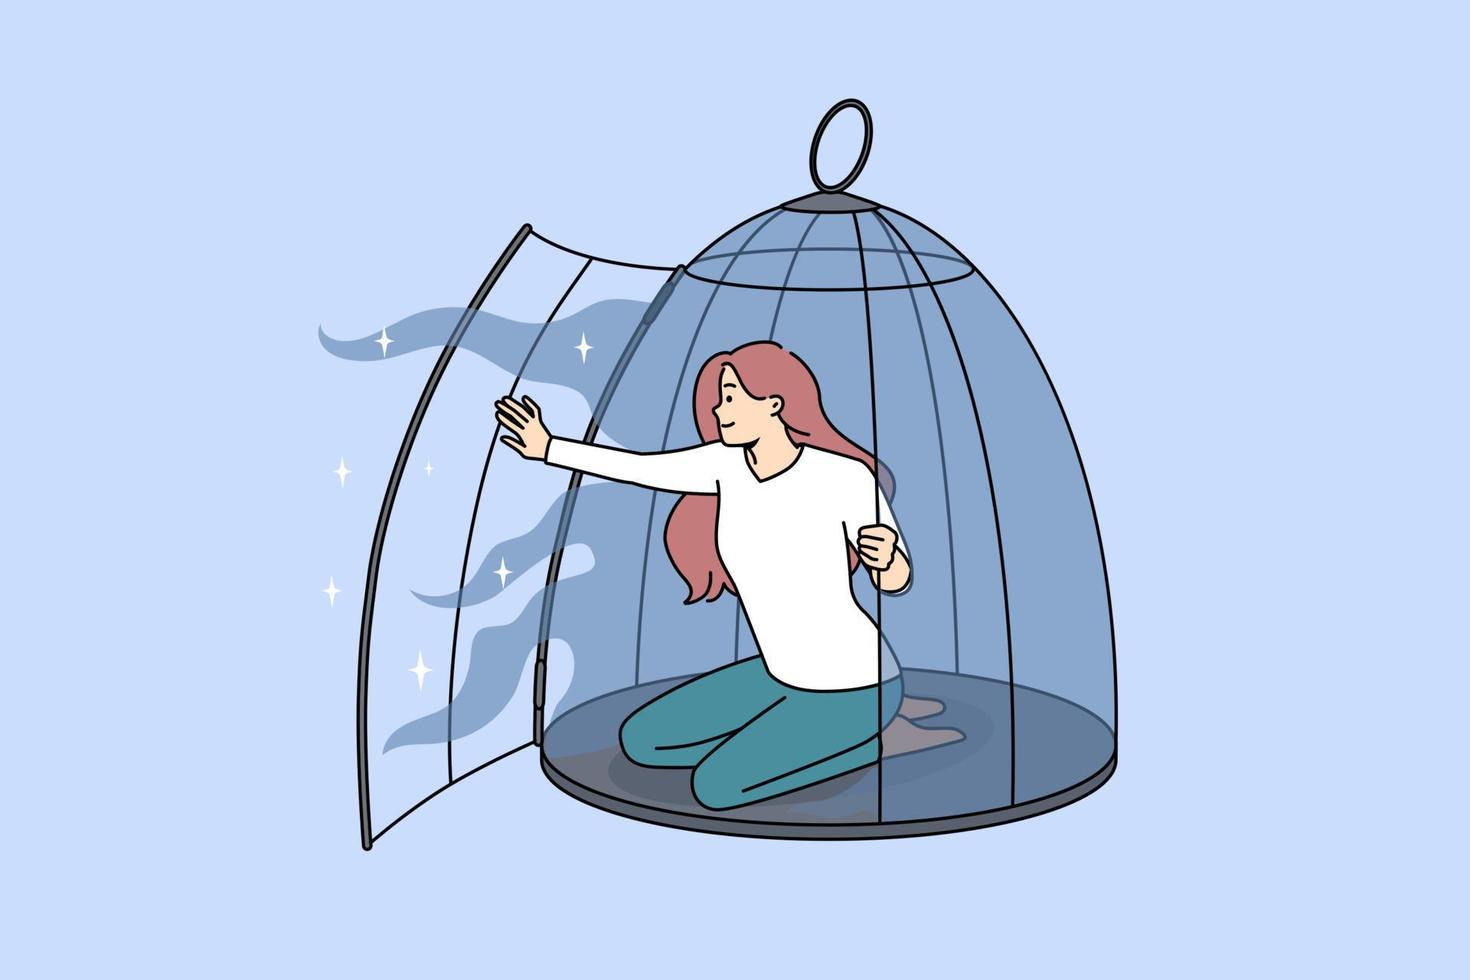 Happy young woman come out of cage recover from depression or mental issue. Smiling girl free from birdcage take new opportunities. Freedom and rehabilitation. Vector illustration.